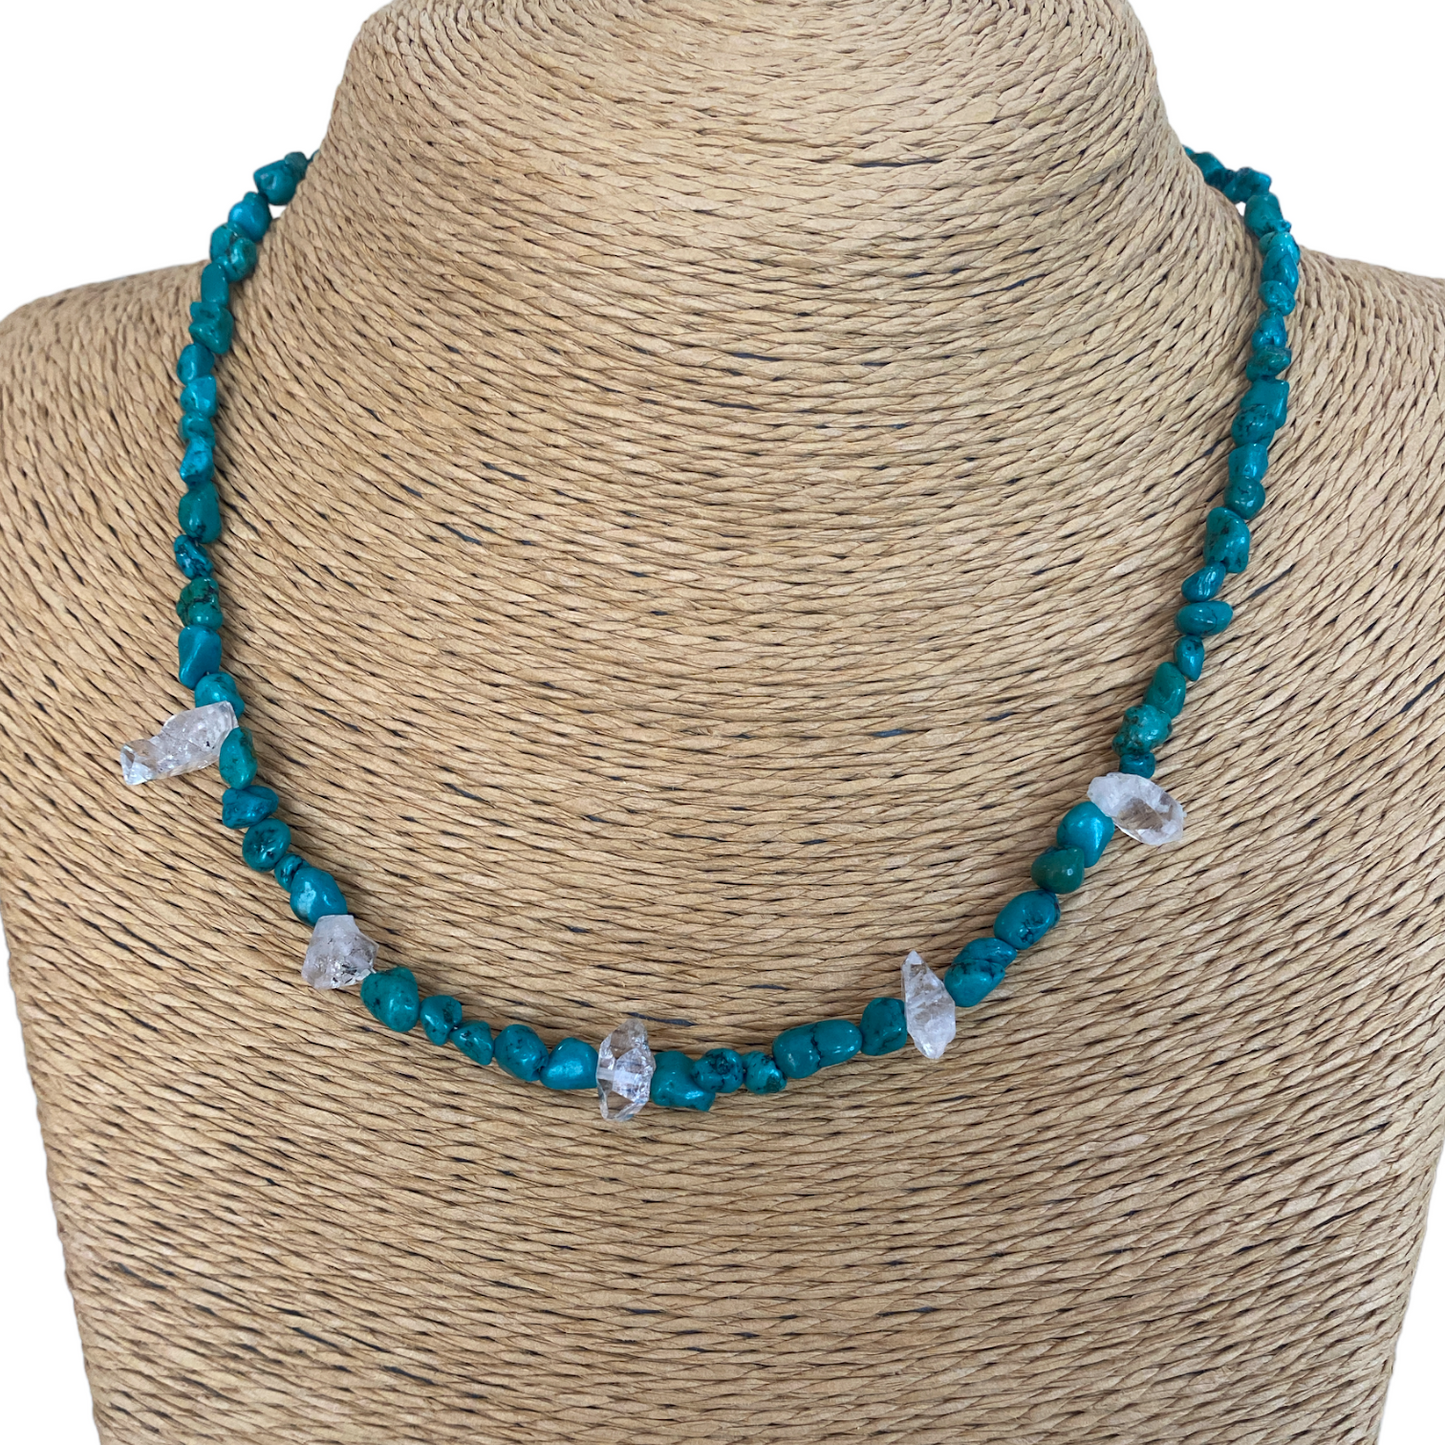 Turquoise & Herkimer Diamond Beaded Necklace - Sterling Silver